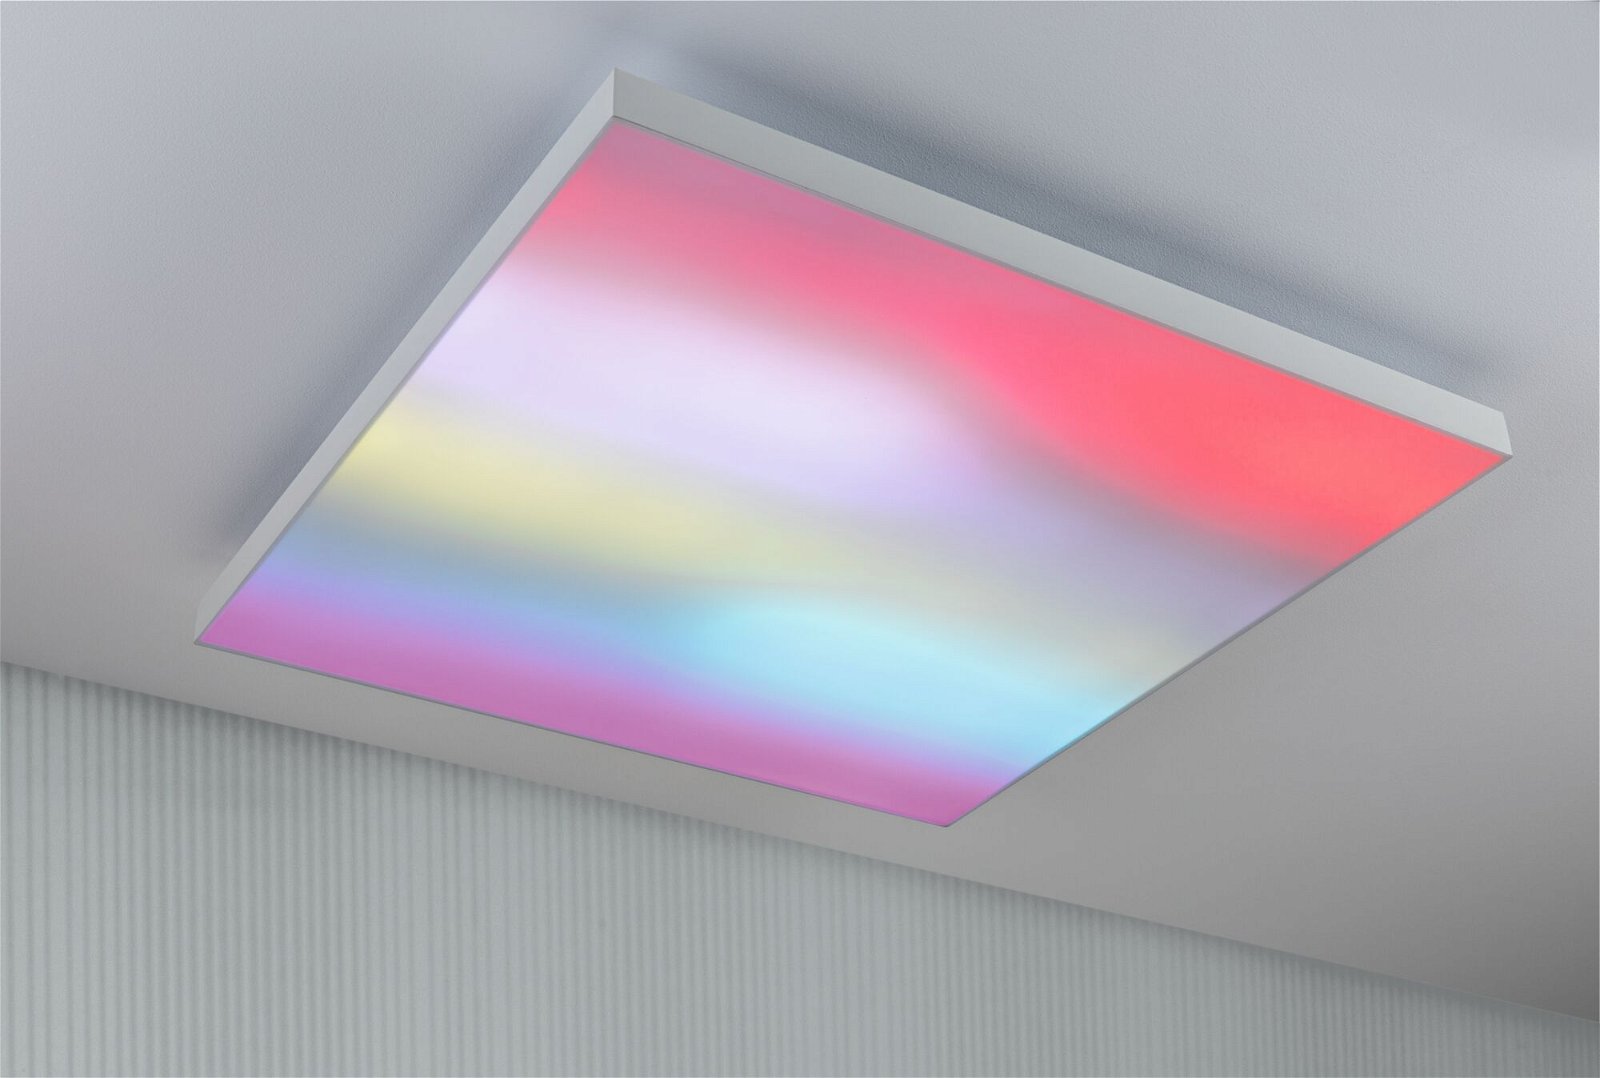 LED Panel Velora Rainbow dynamicRGBW square 595x595mm 31W 2820lm 3000 - 6500K White dimmable